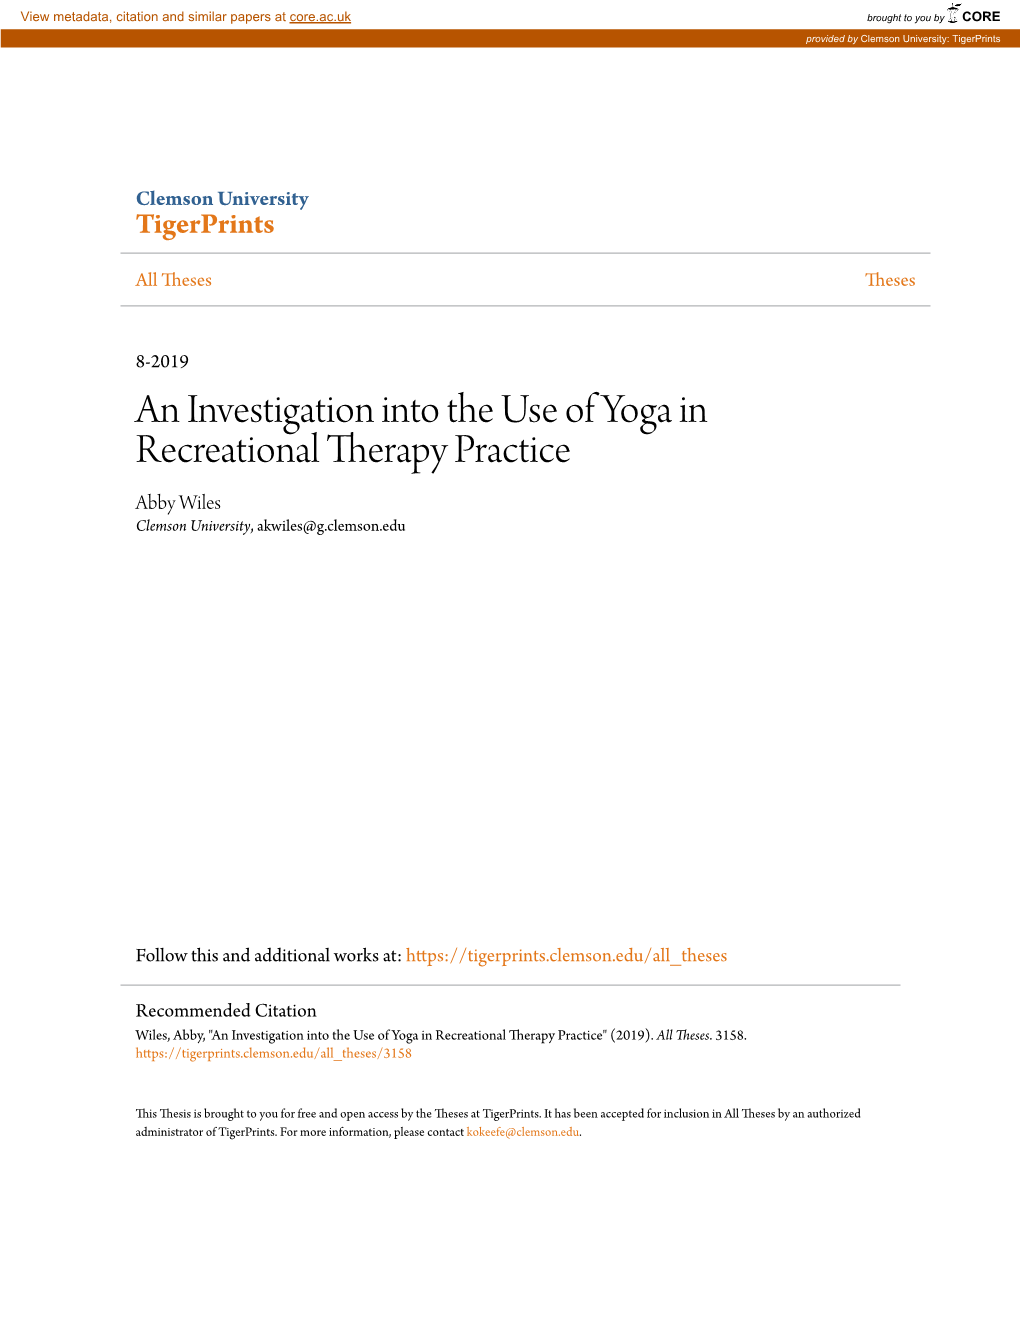 An Investigation Into the Use of Yoga in Recreational Therapy Practice Abby Wiles Clemson University, Akwiles@G.Clemson.Edu